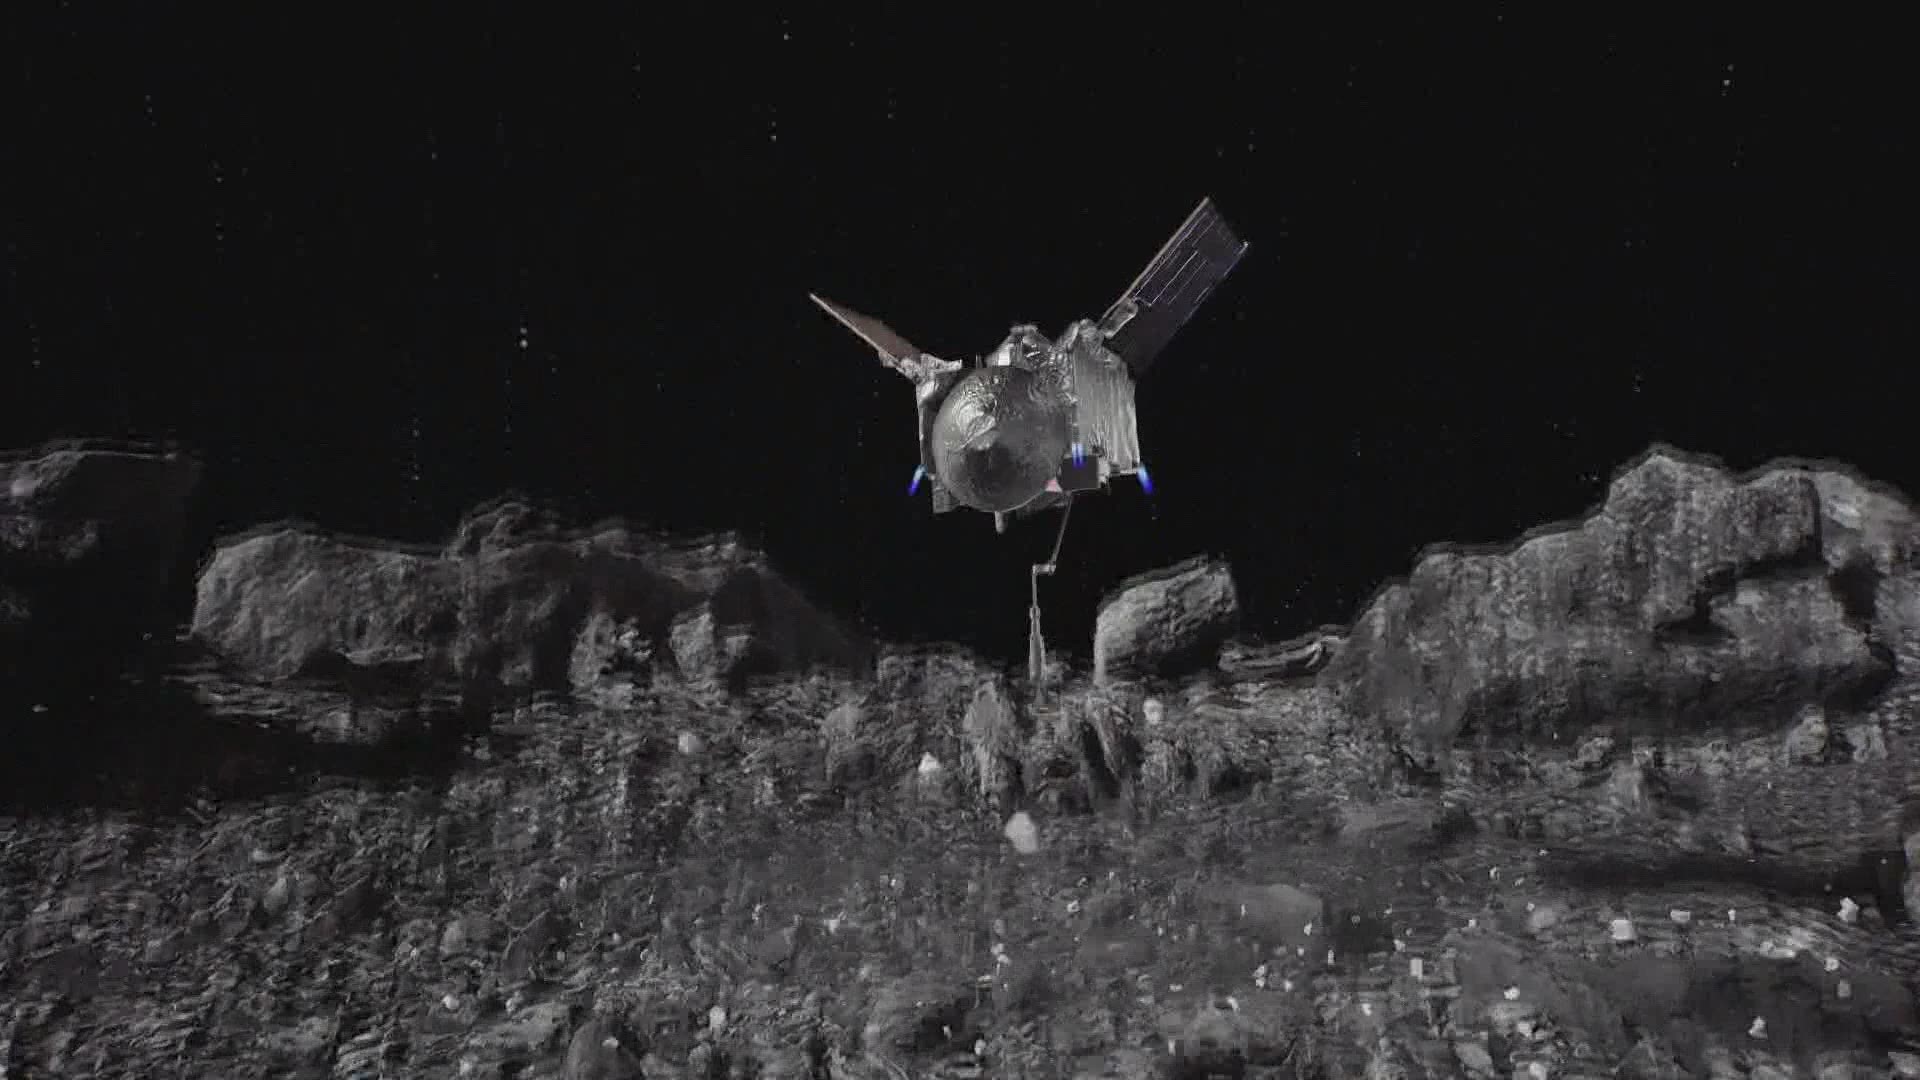 Samples of an asteroid are headed back to earth on Nasa's spacecraft Osiris Rex